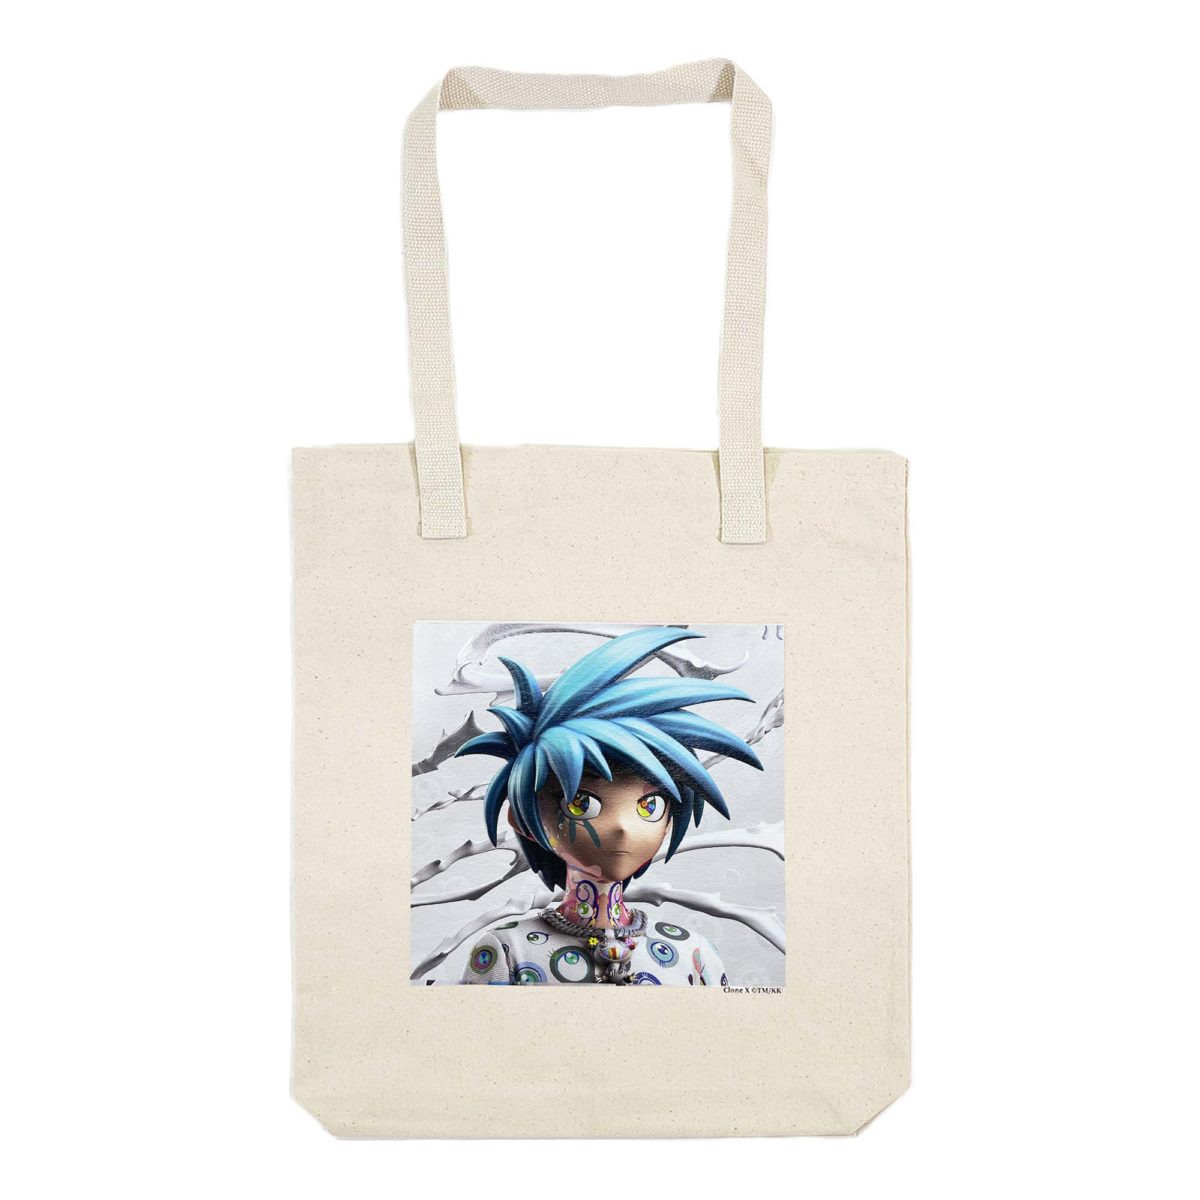 The Takashi from Murakami Tote Bag for Sale by emrecian